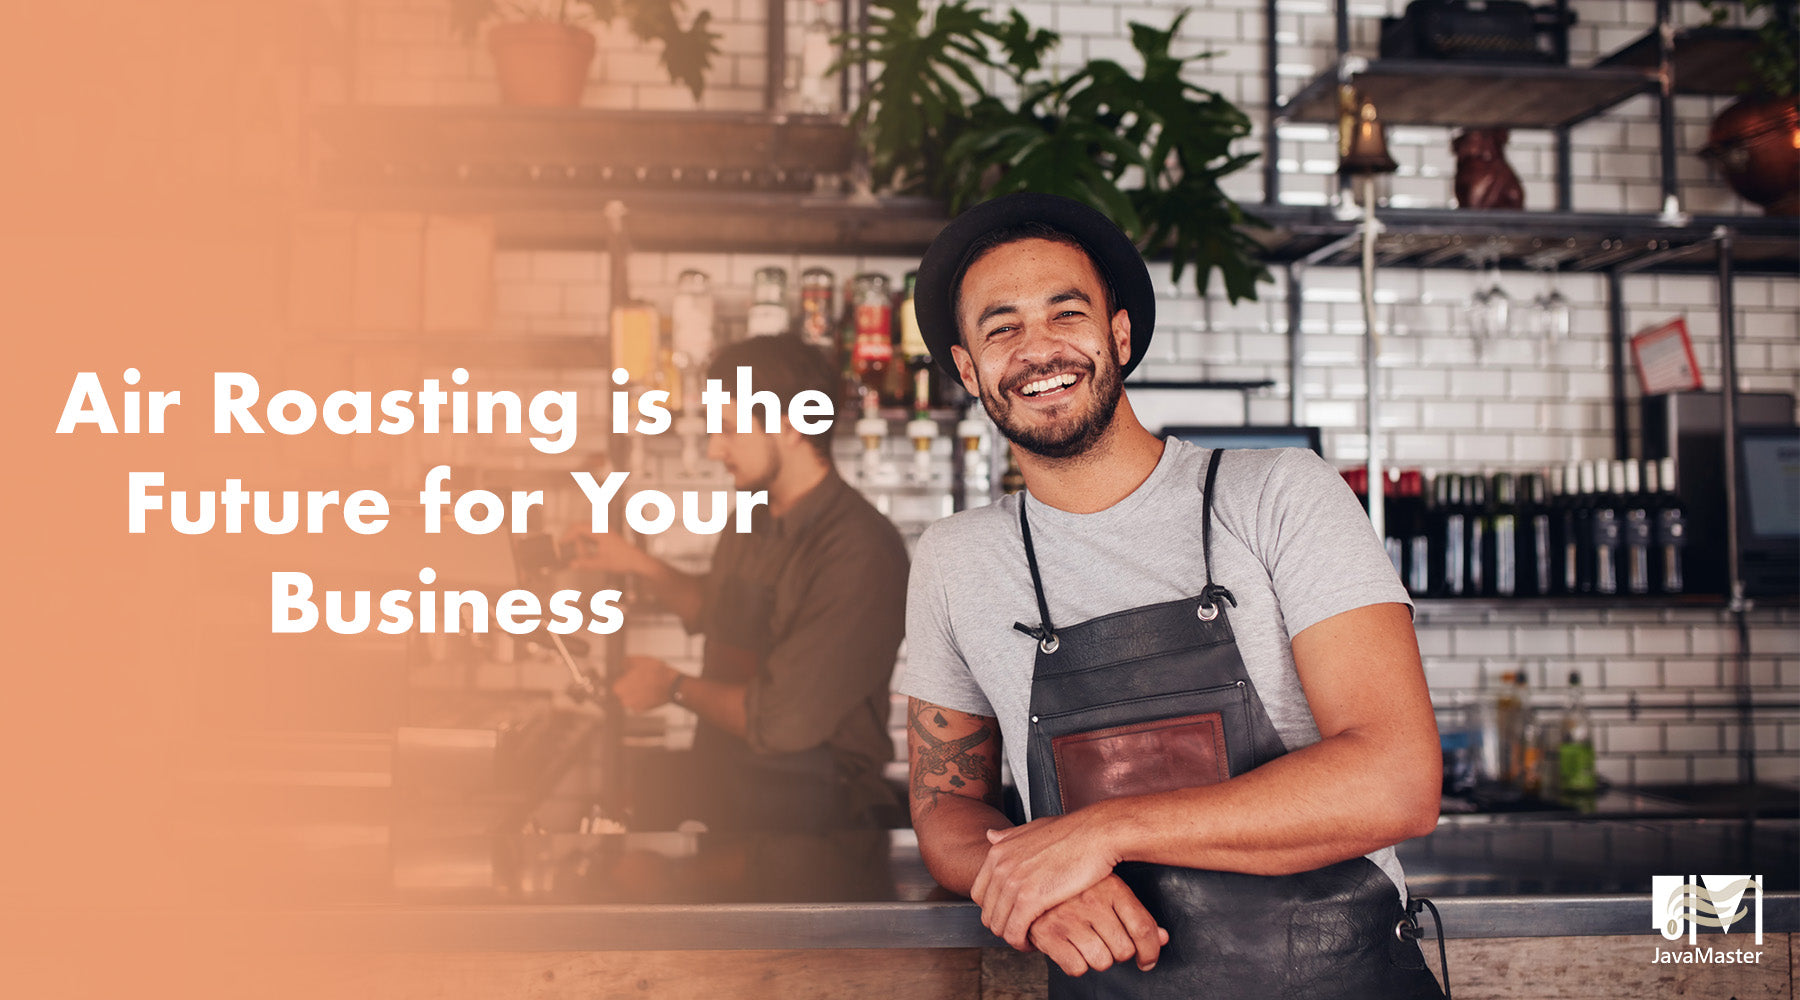 Why Air Roasting is the Future for Your Business